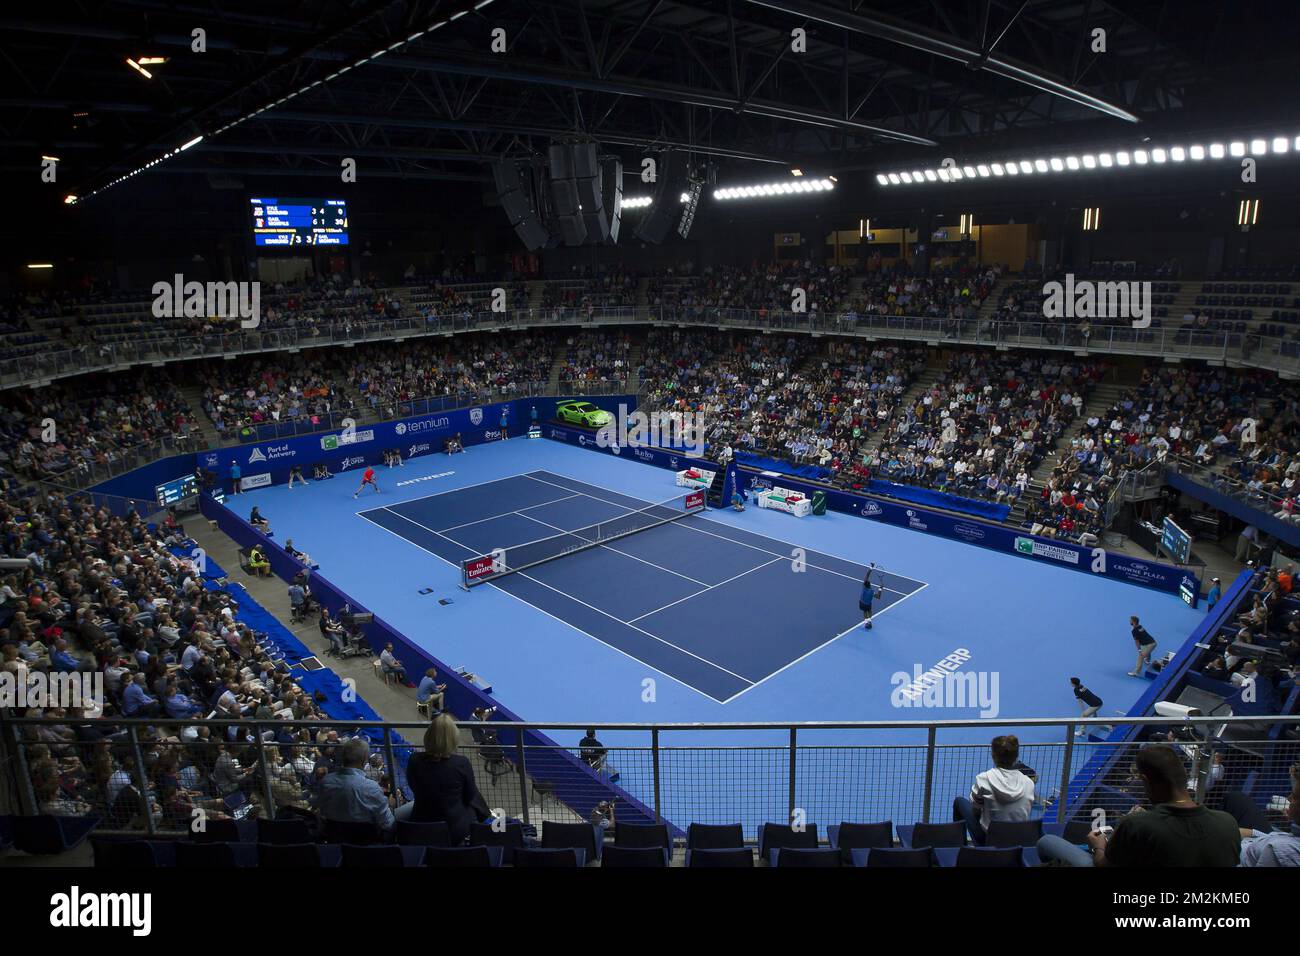 Illustration picture shows the Lotto Arena during a tennis game between French Gael Monfils (ATP-38) and British Kyle Edmund (ATP-15), the final of the 'European Open' hard court tennis tournament in Antwerp, Sunday 21 October 2018. BELGA PHOTO KRISTOF VAN ACCOM Stock Photo